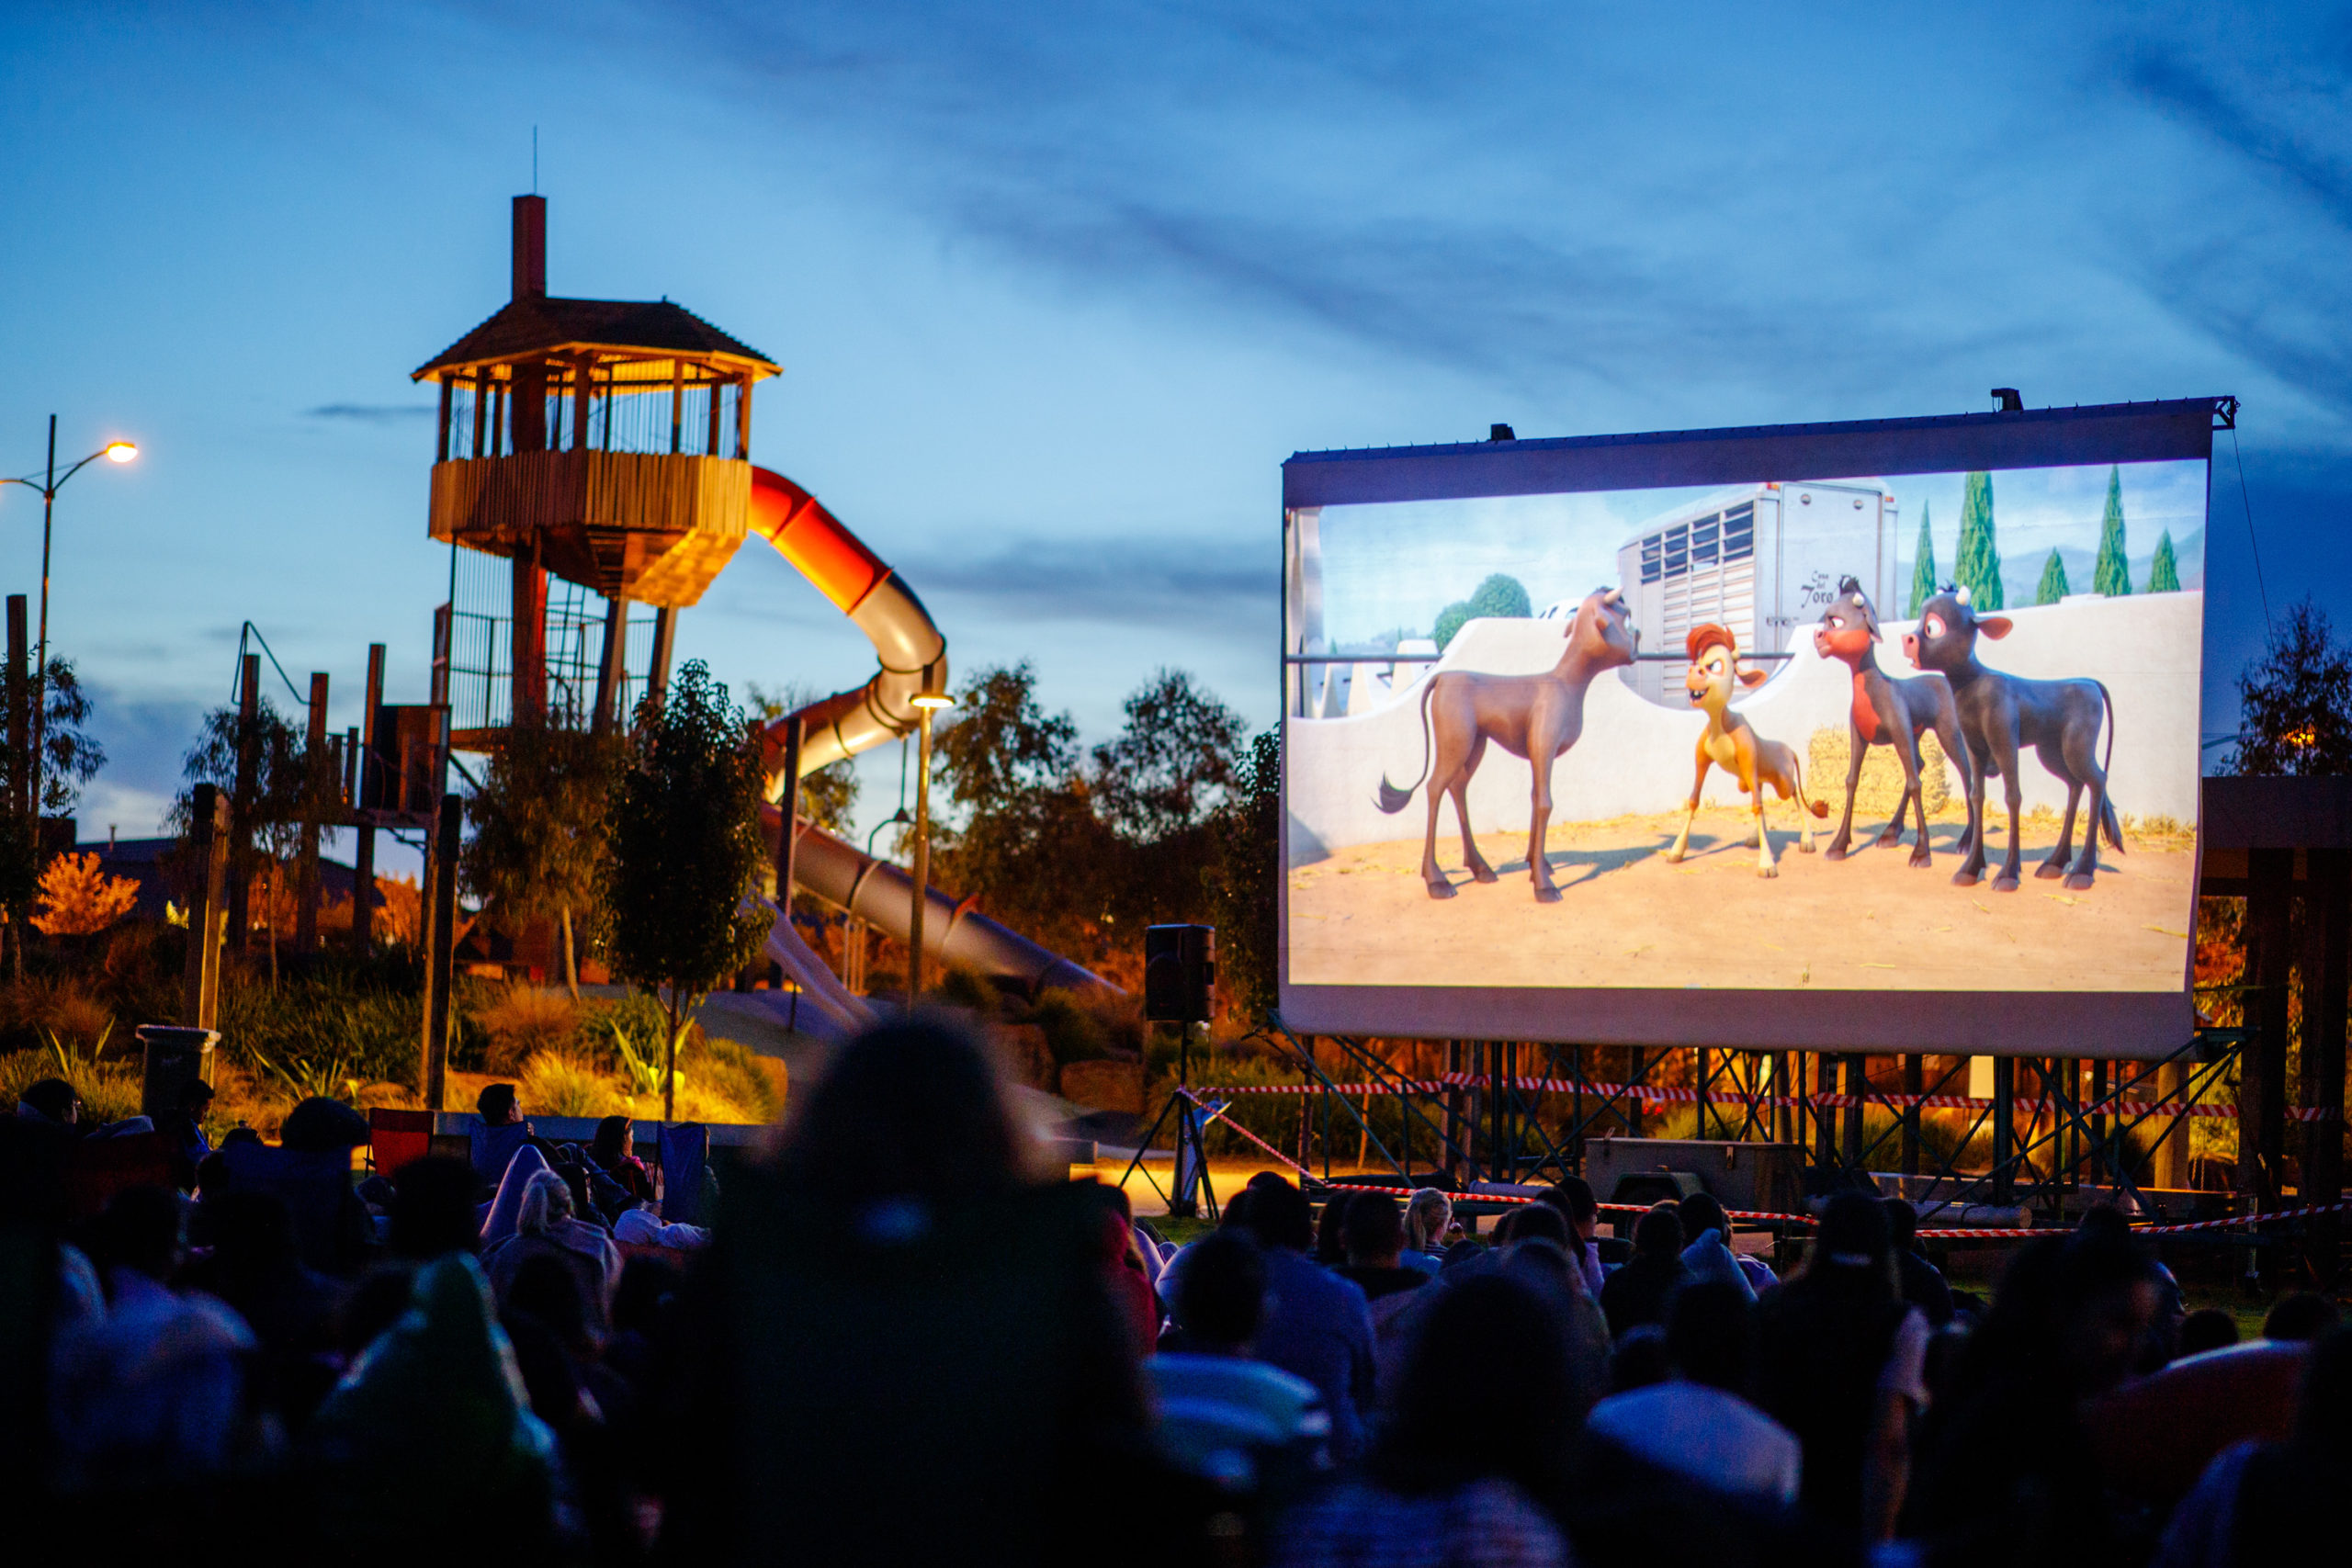 Be our guest for our Moonlight Cinema Easter Extravaganza